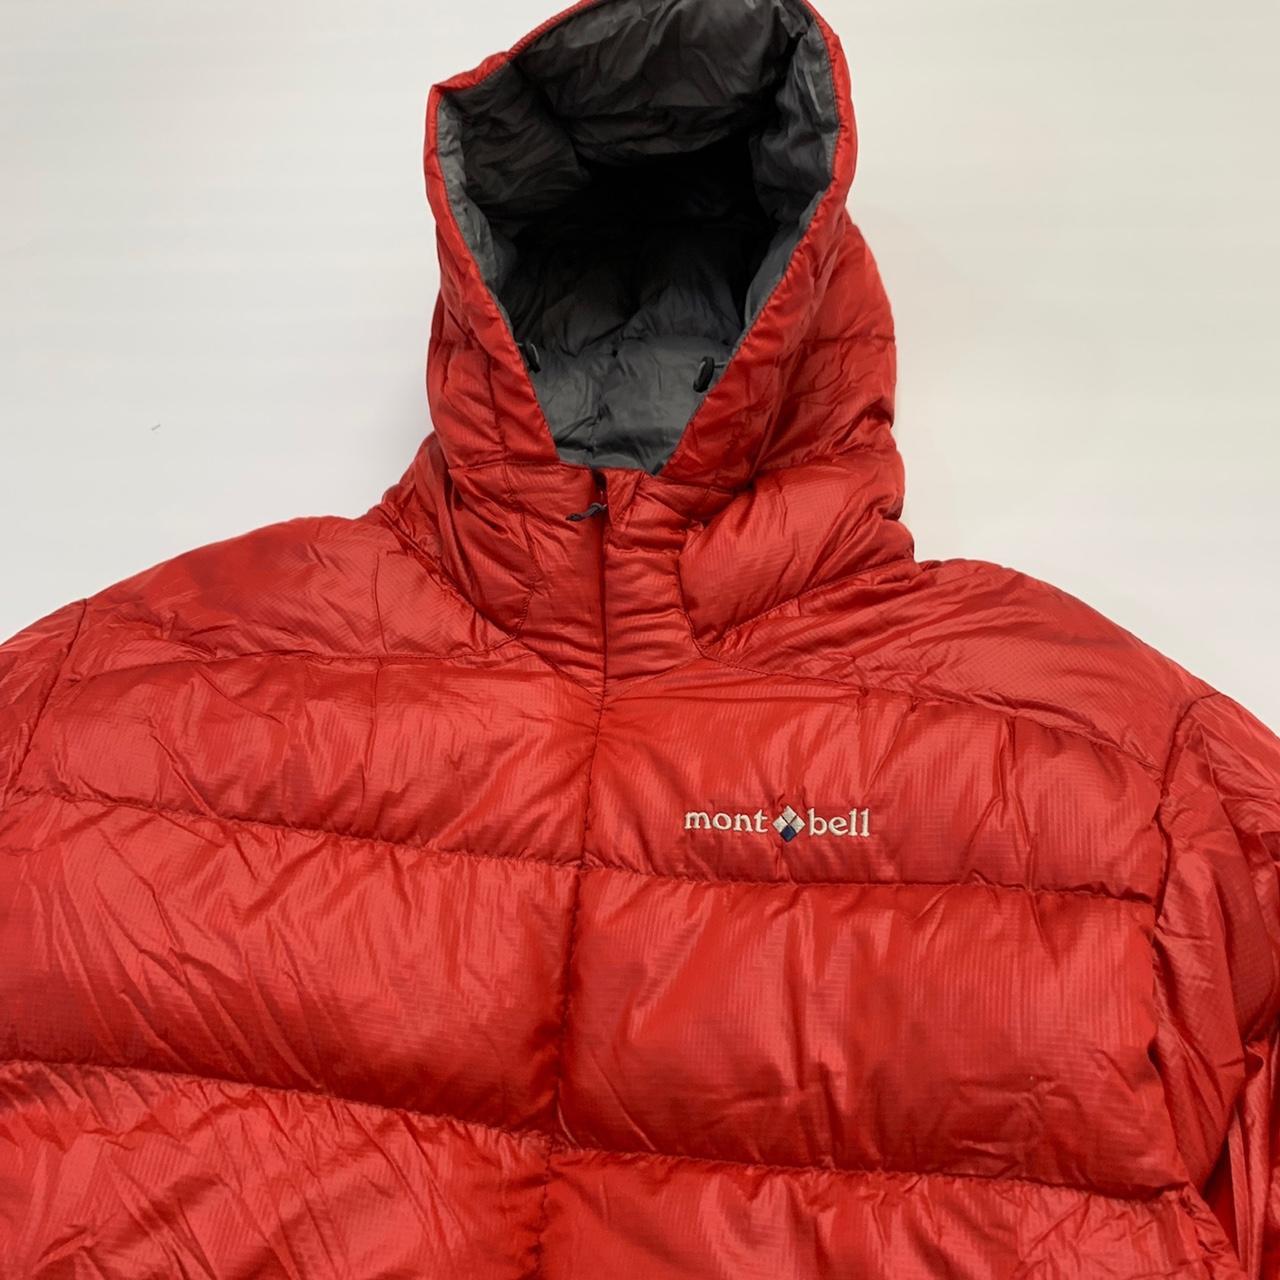 Montbell Puffer Size M Red montbell glossy hooded... - Depop